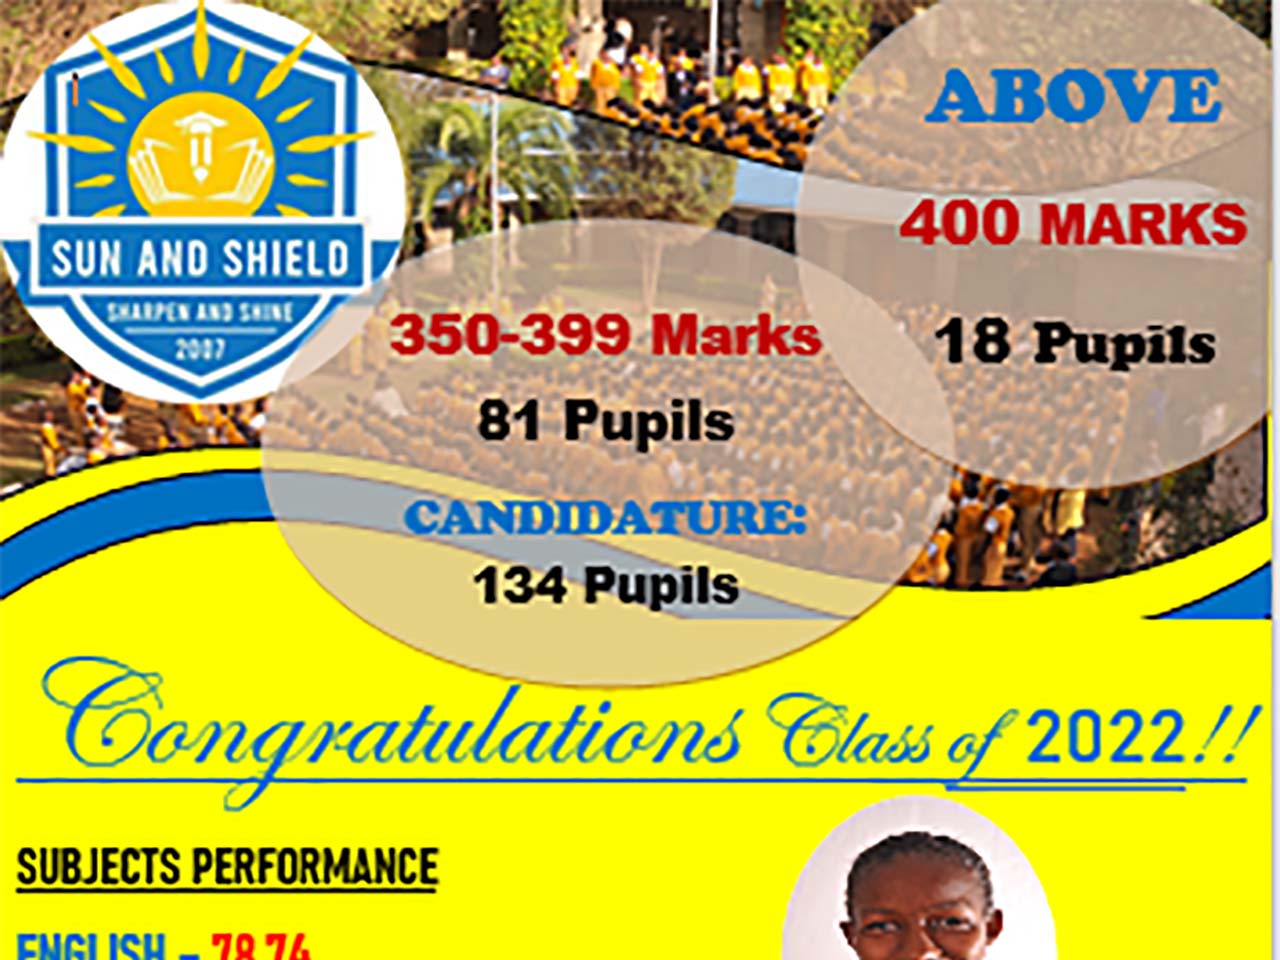 Congratulations the Calebs’ Class Of 2022 on Your Exemplary Performance.